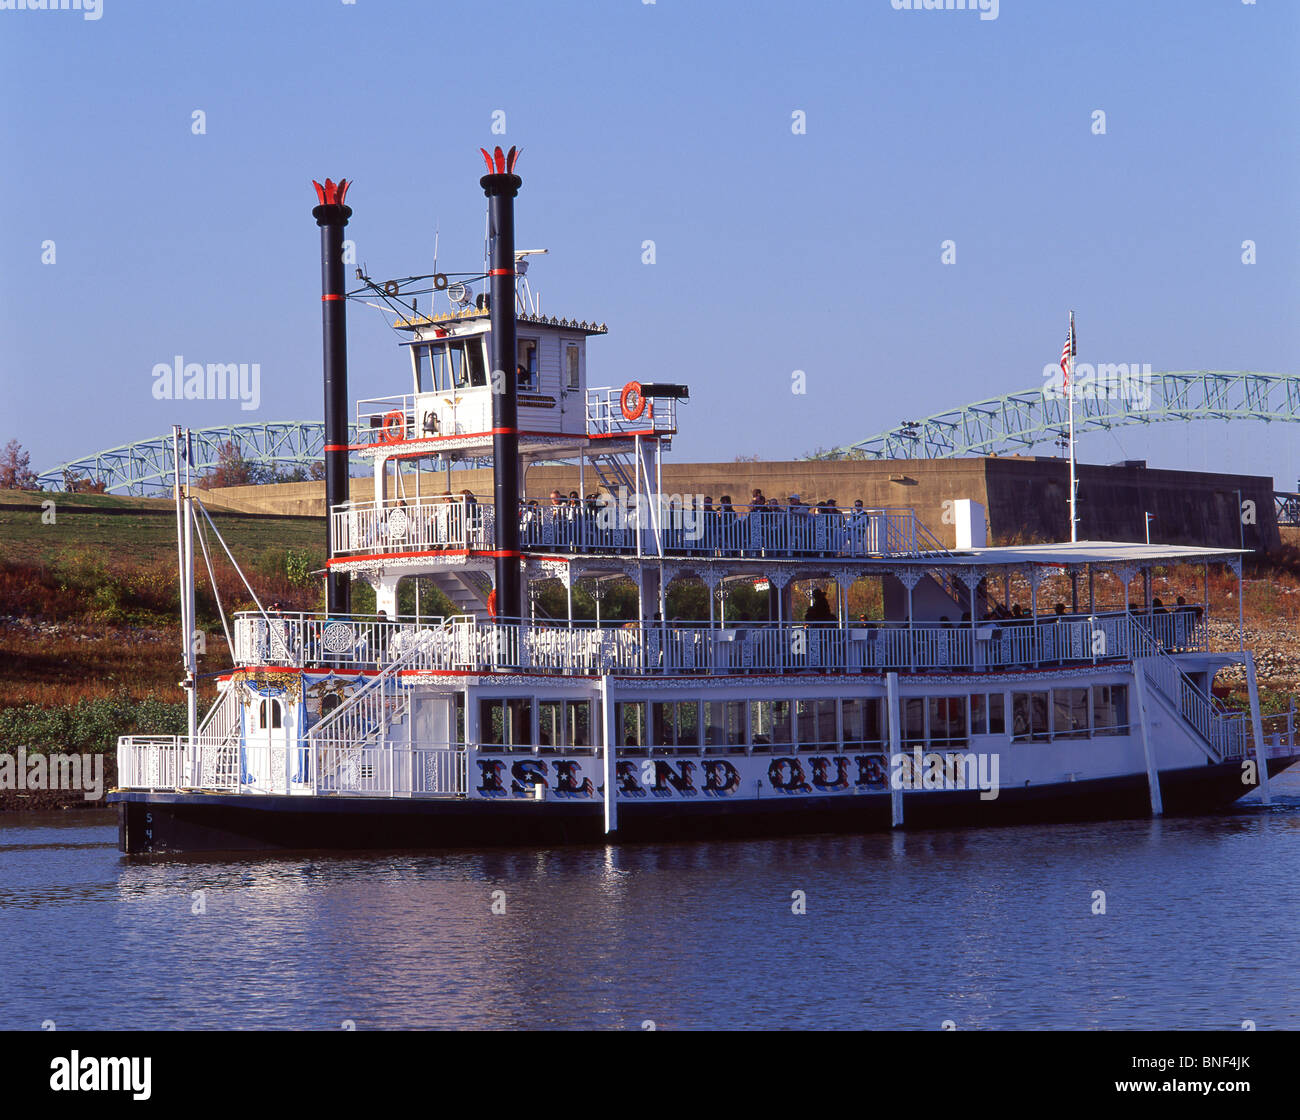 'Island Queen' Mississippi Steamboat, Memphis, Tennessee, United States of America Stock Photo